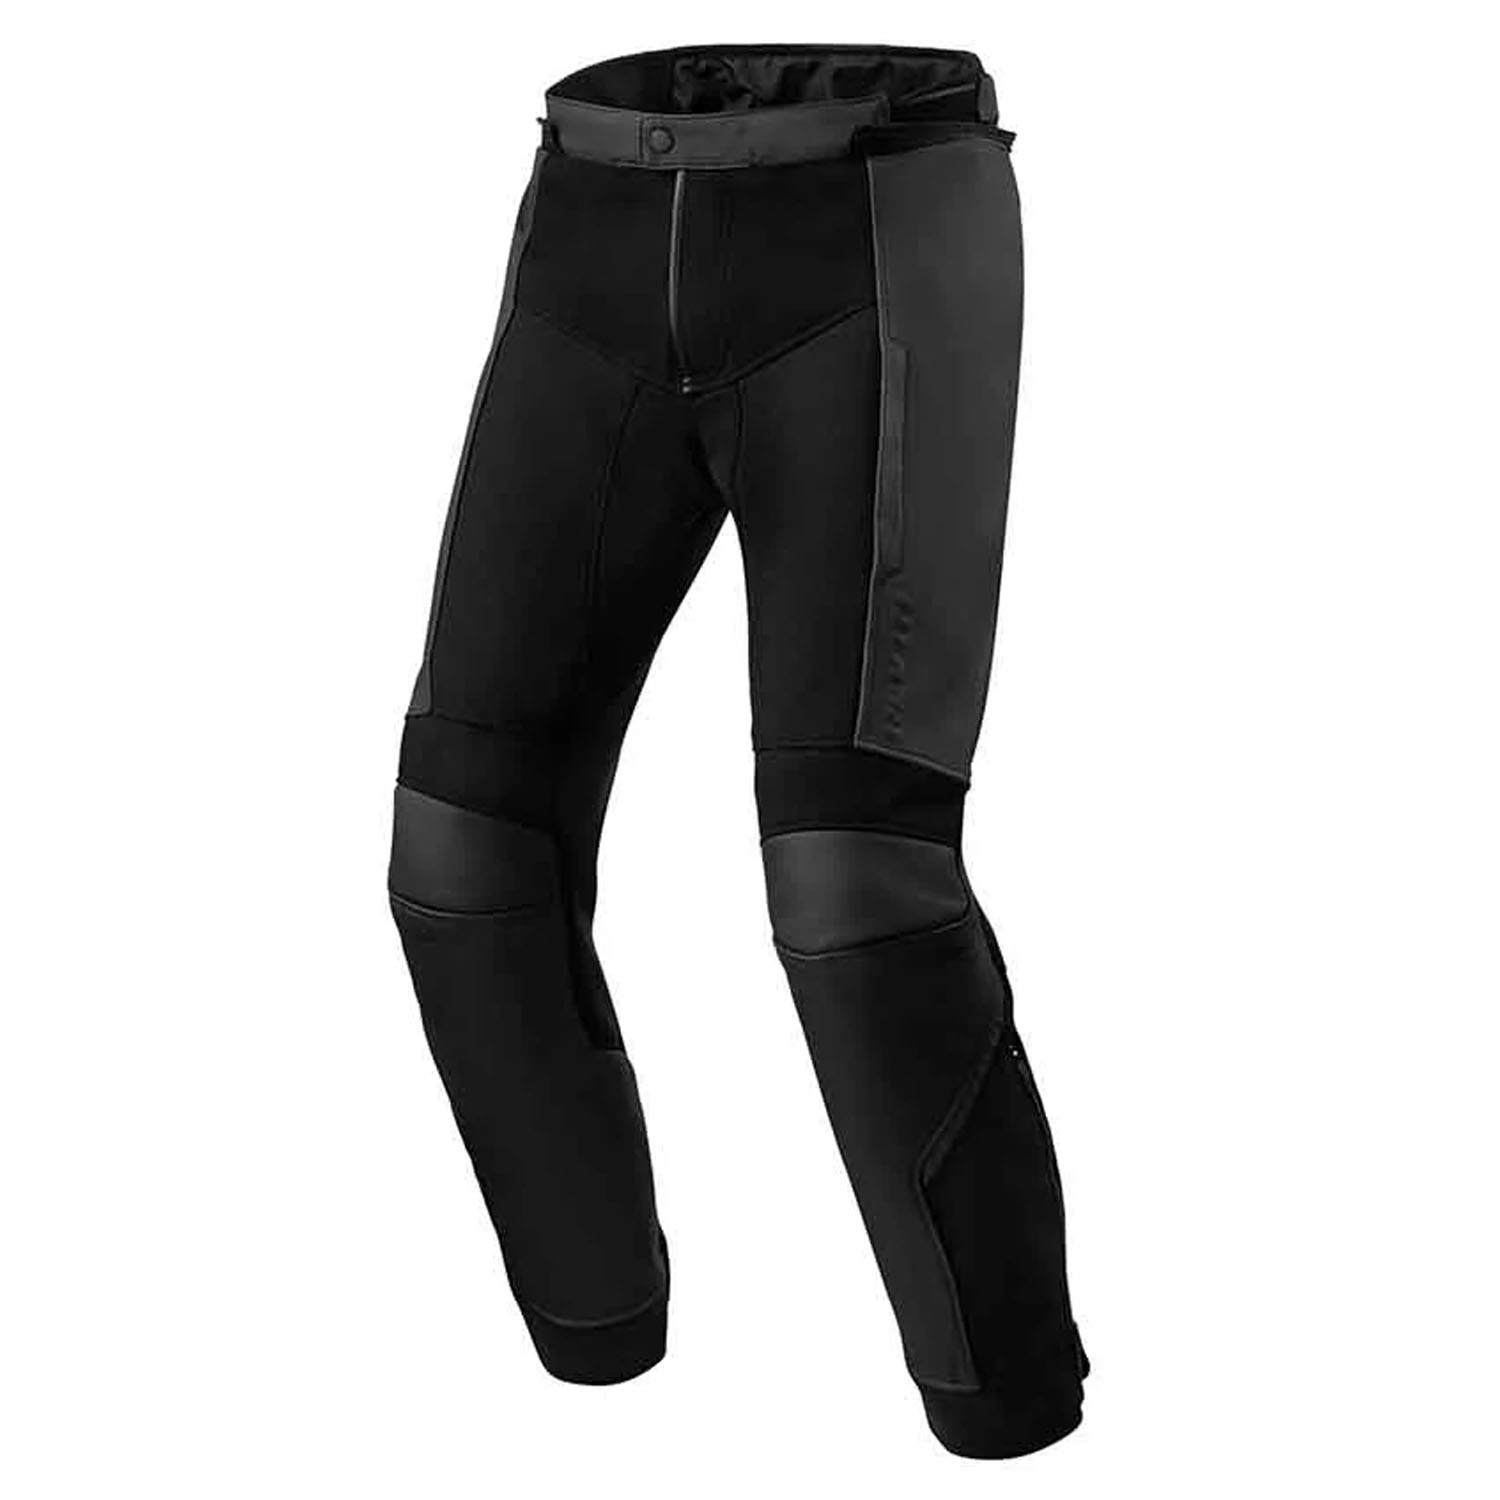 Image of REV'IT! Ignition 4 H2O Black Long Motorcycle Pants Size 46 ID 8700001359399